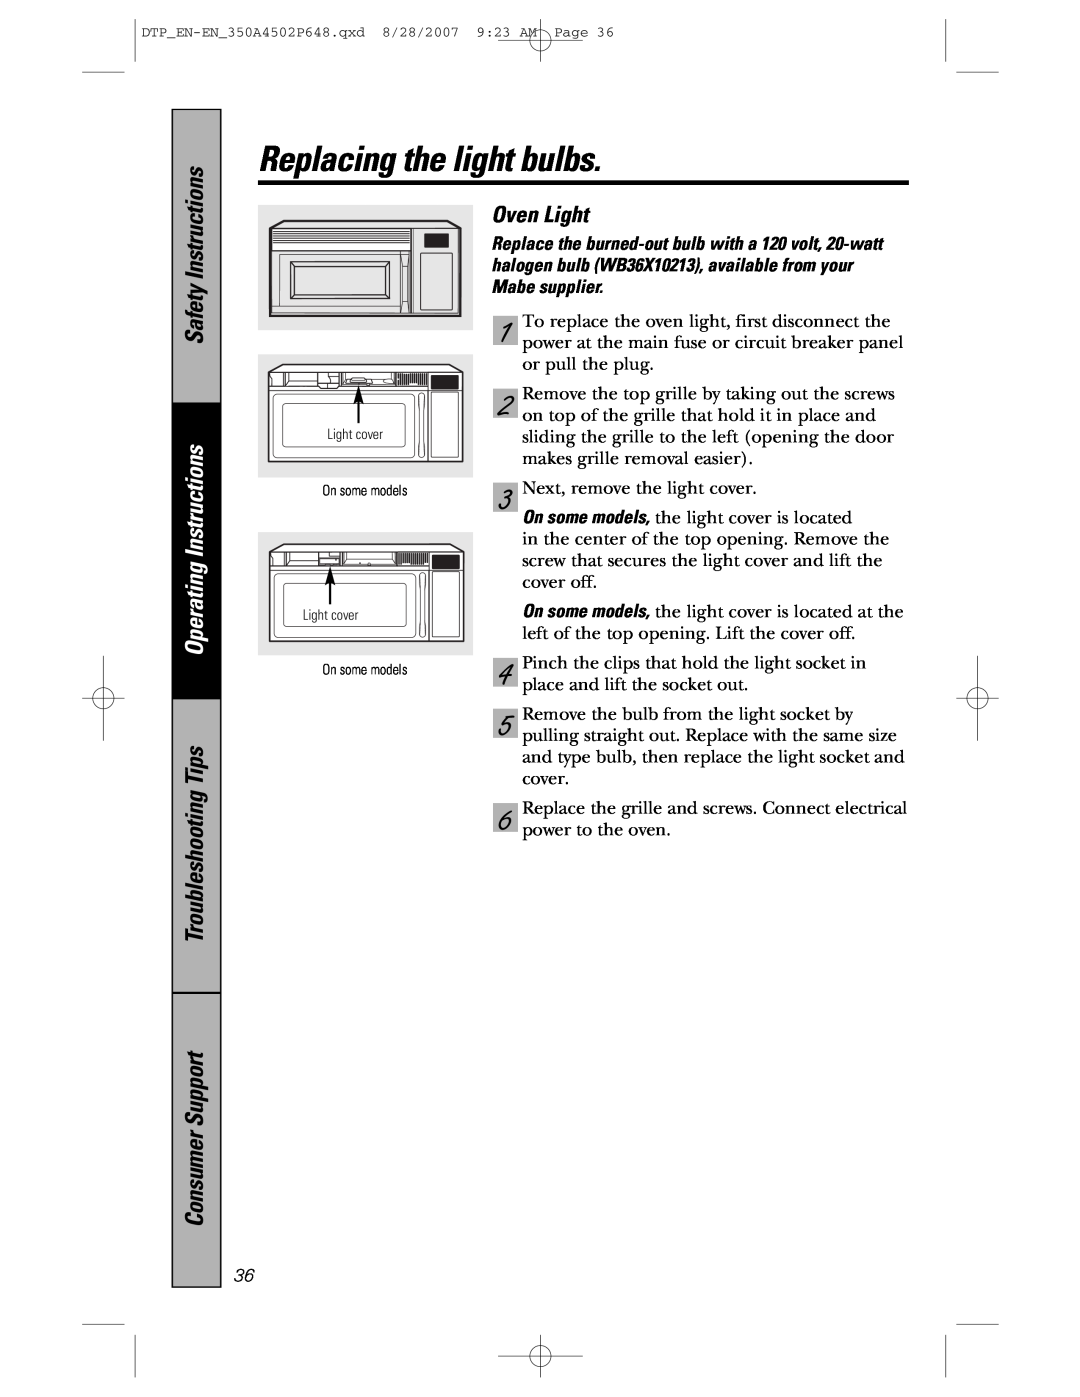 GE pvm1870 owner manual Oven Light, Replacing the light bulbs, Instructions, Safety, Troubleshooting Tips Consumer Support 